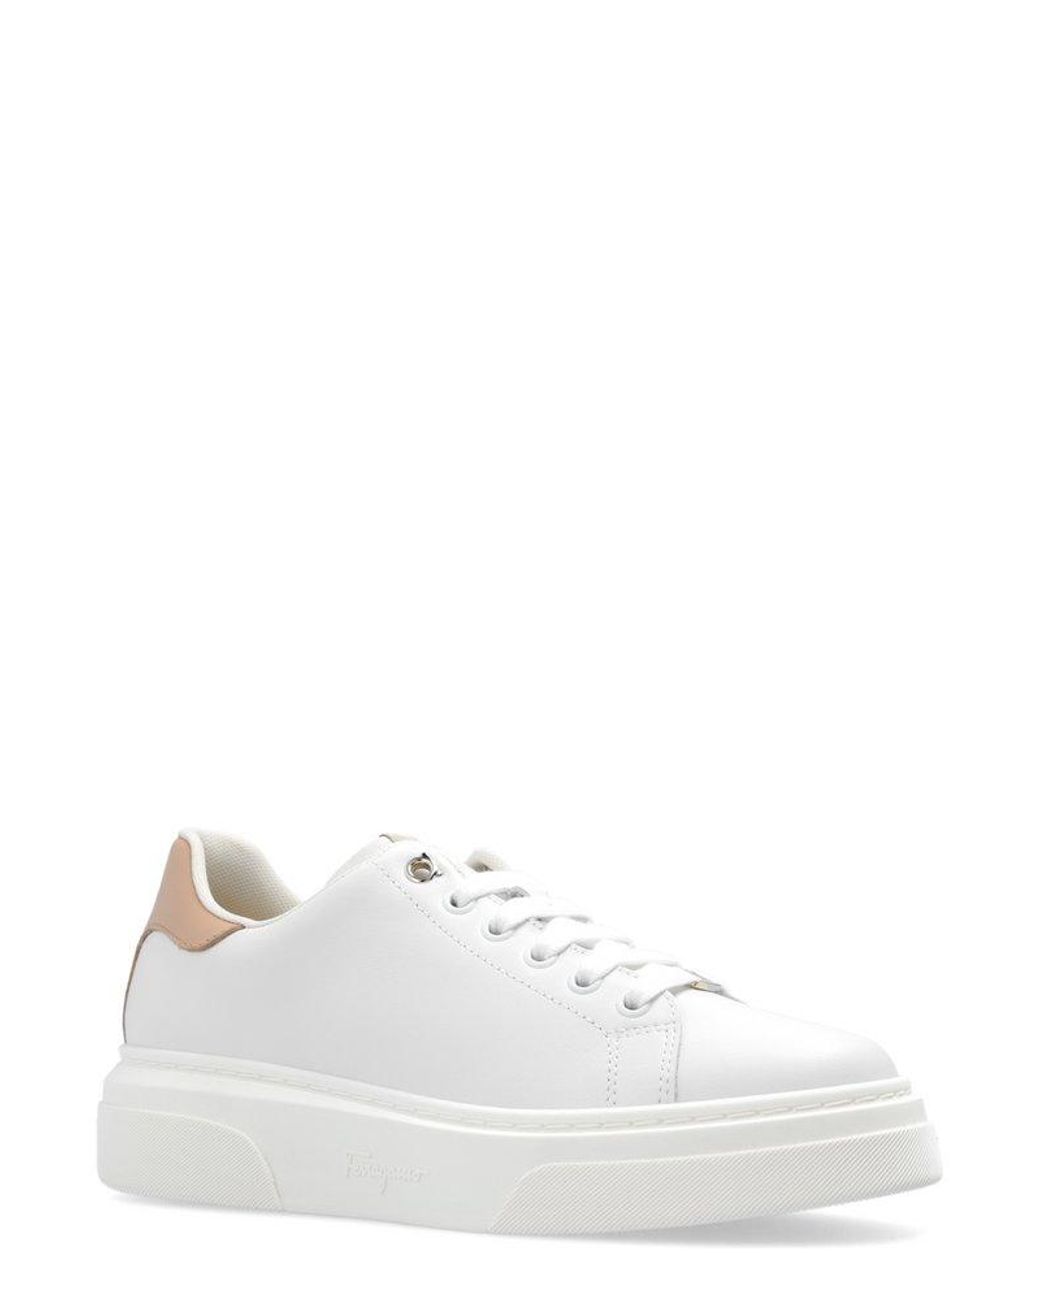 Ferragamo Vara-chain Round-toe Lace-up Sneakers in White | Lyst